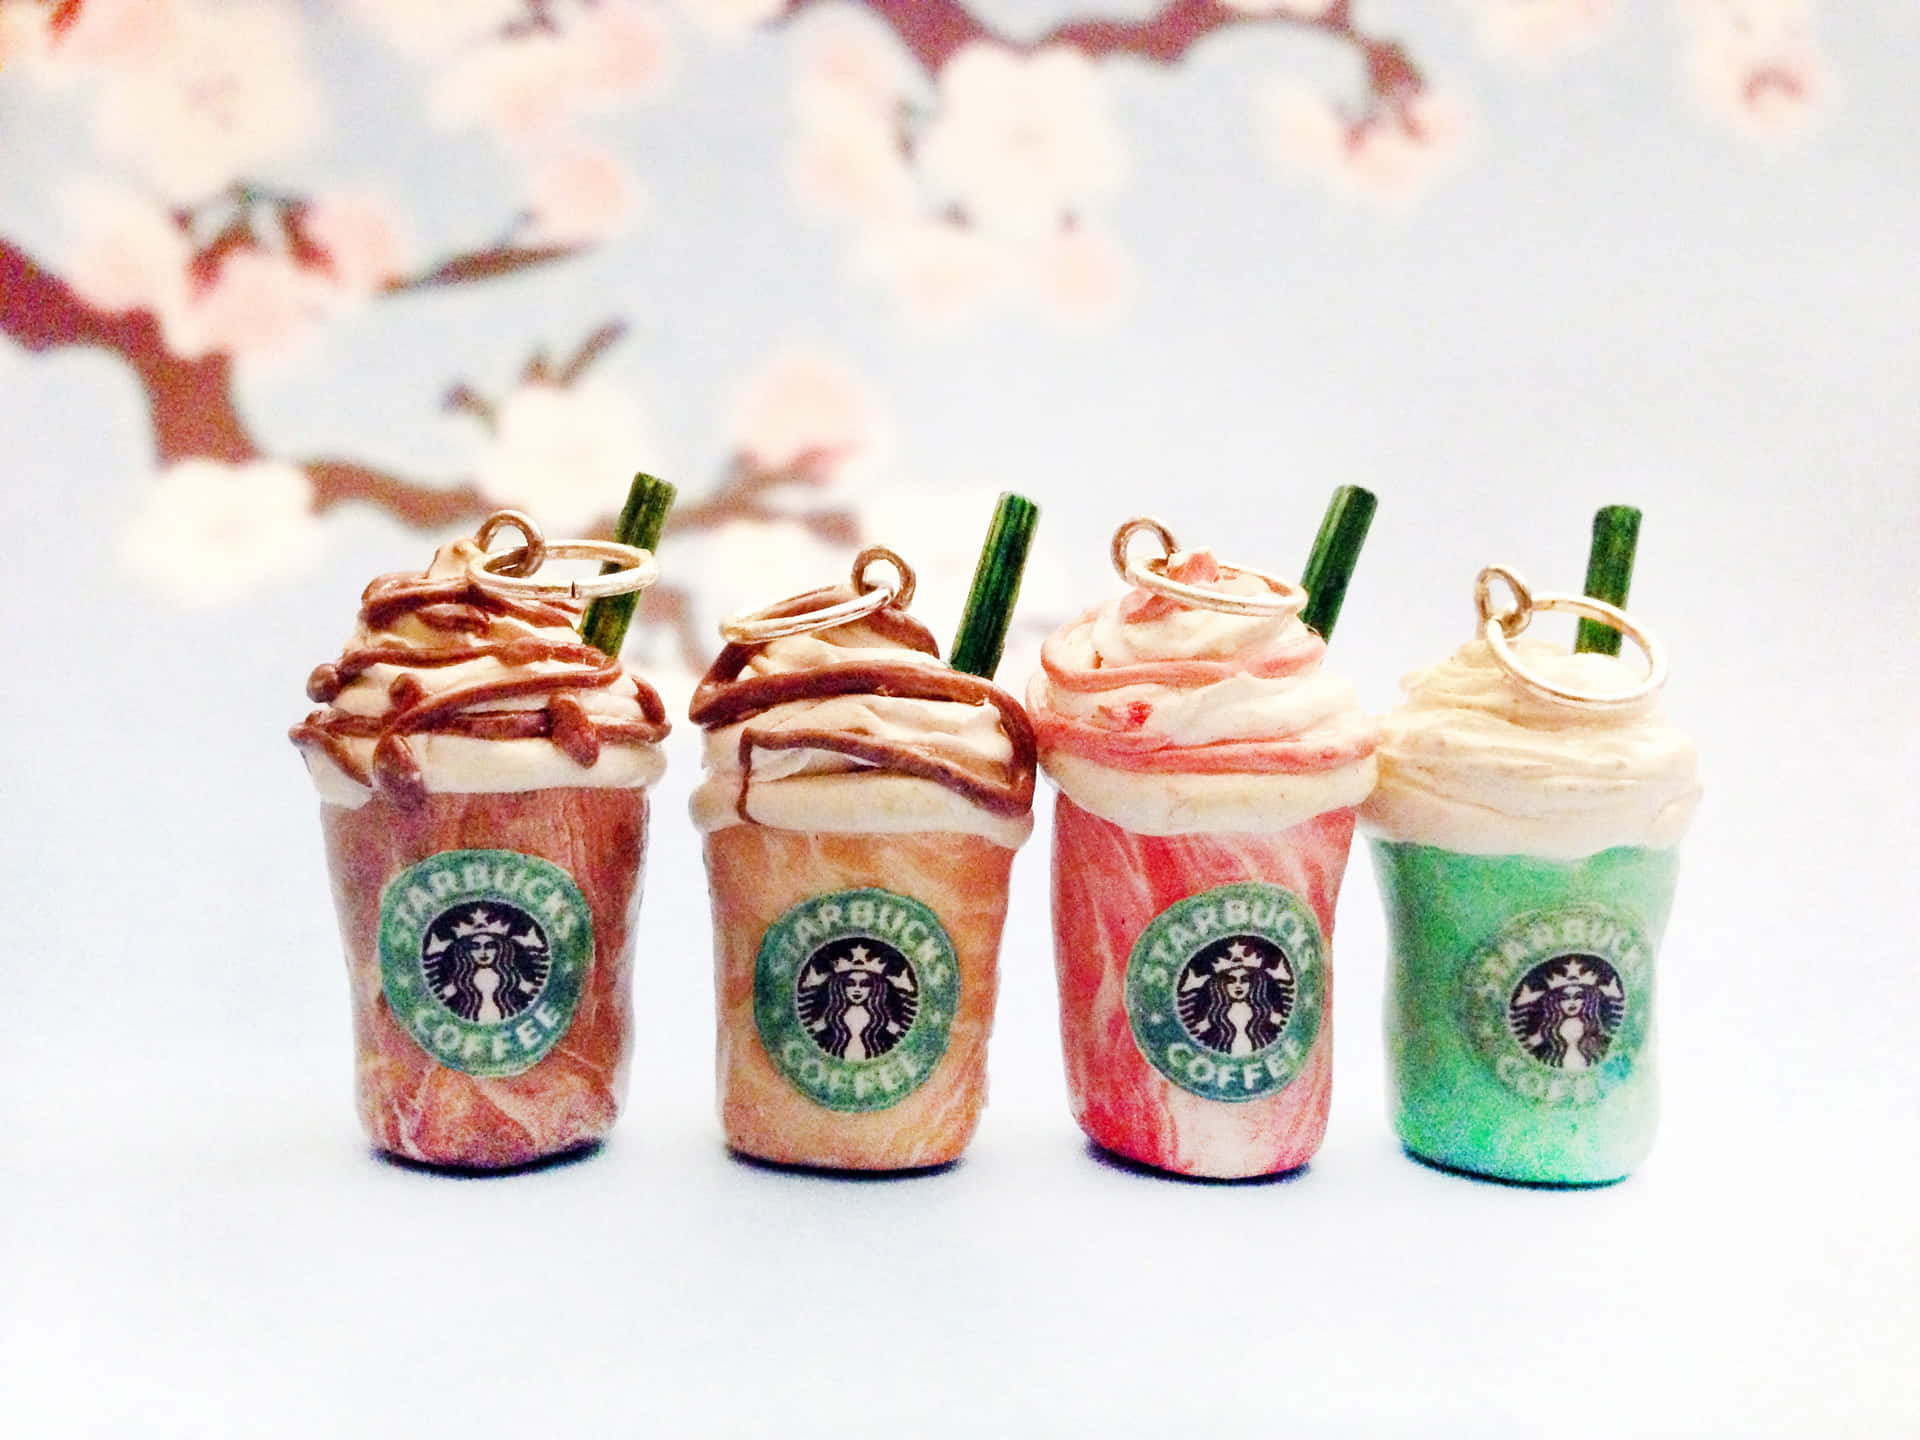 Enjoy the moment with a delicious cup of Starbucks coffee!